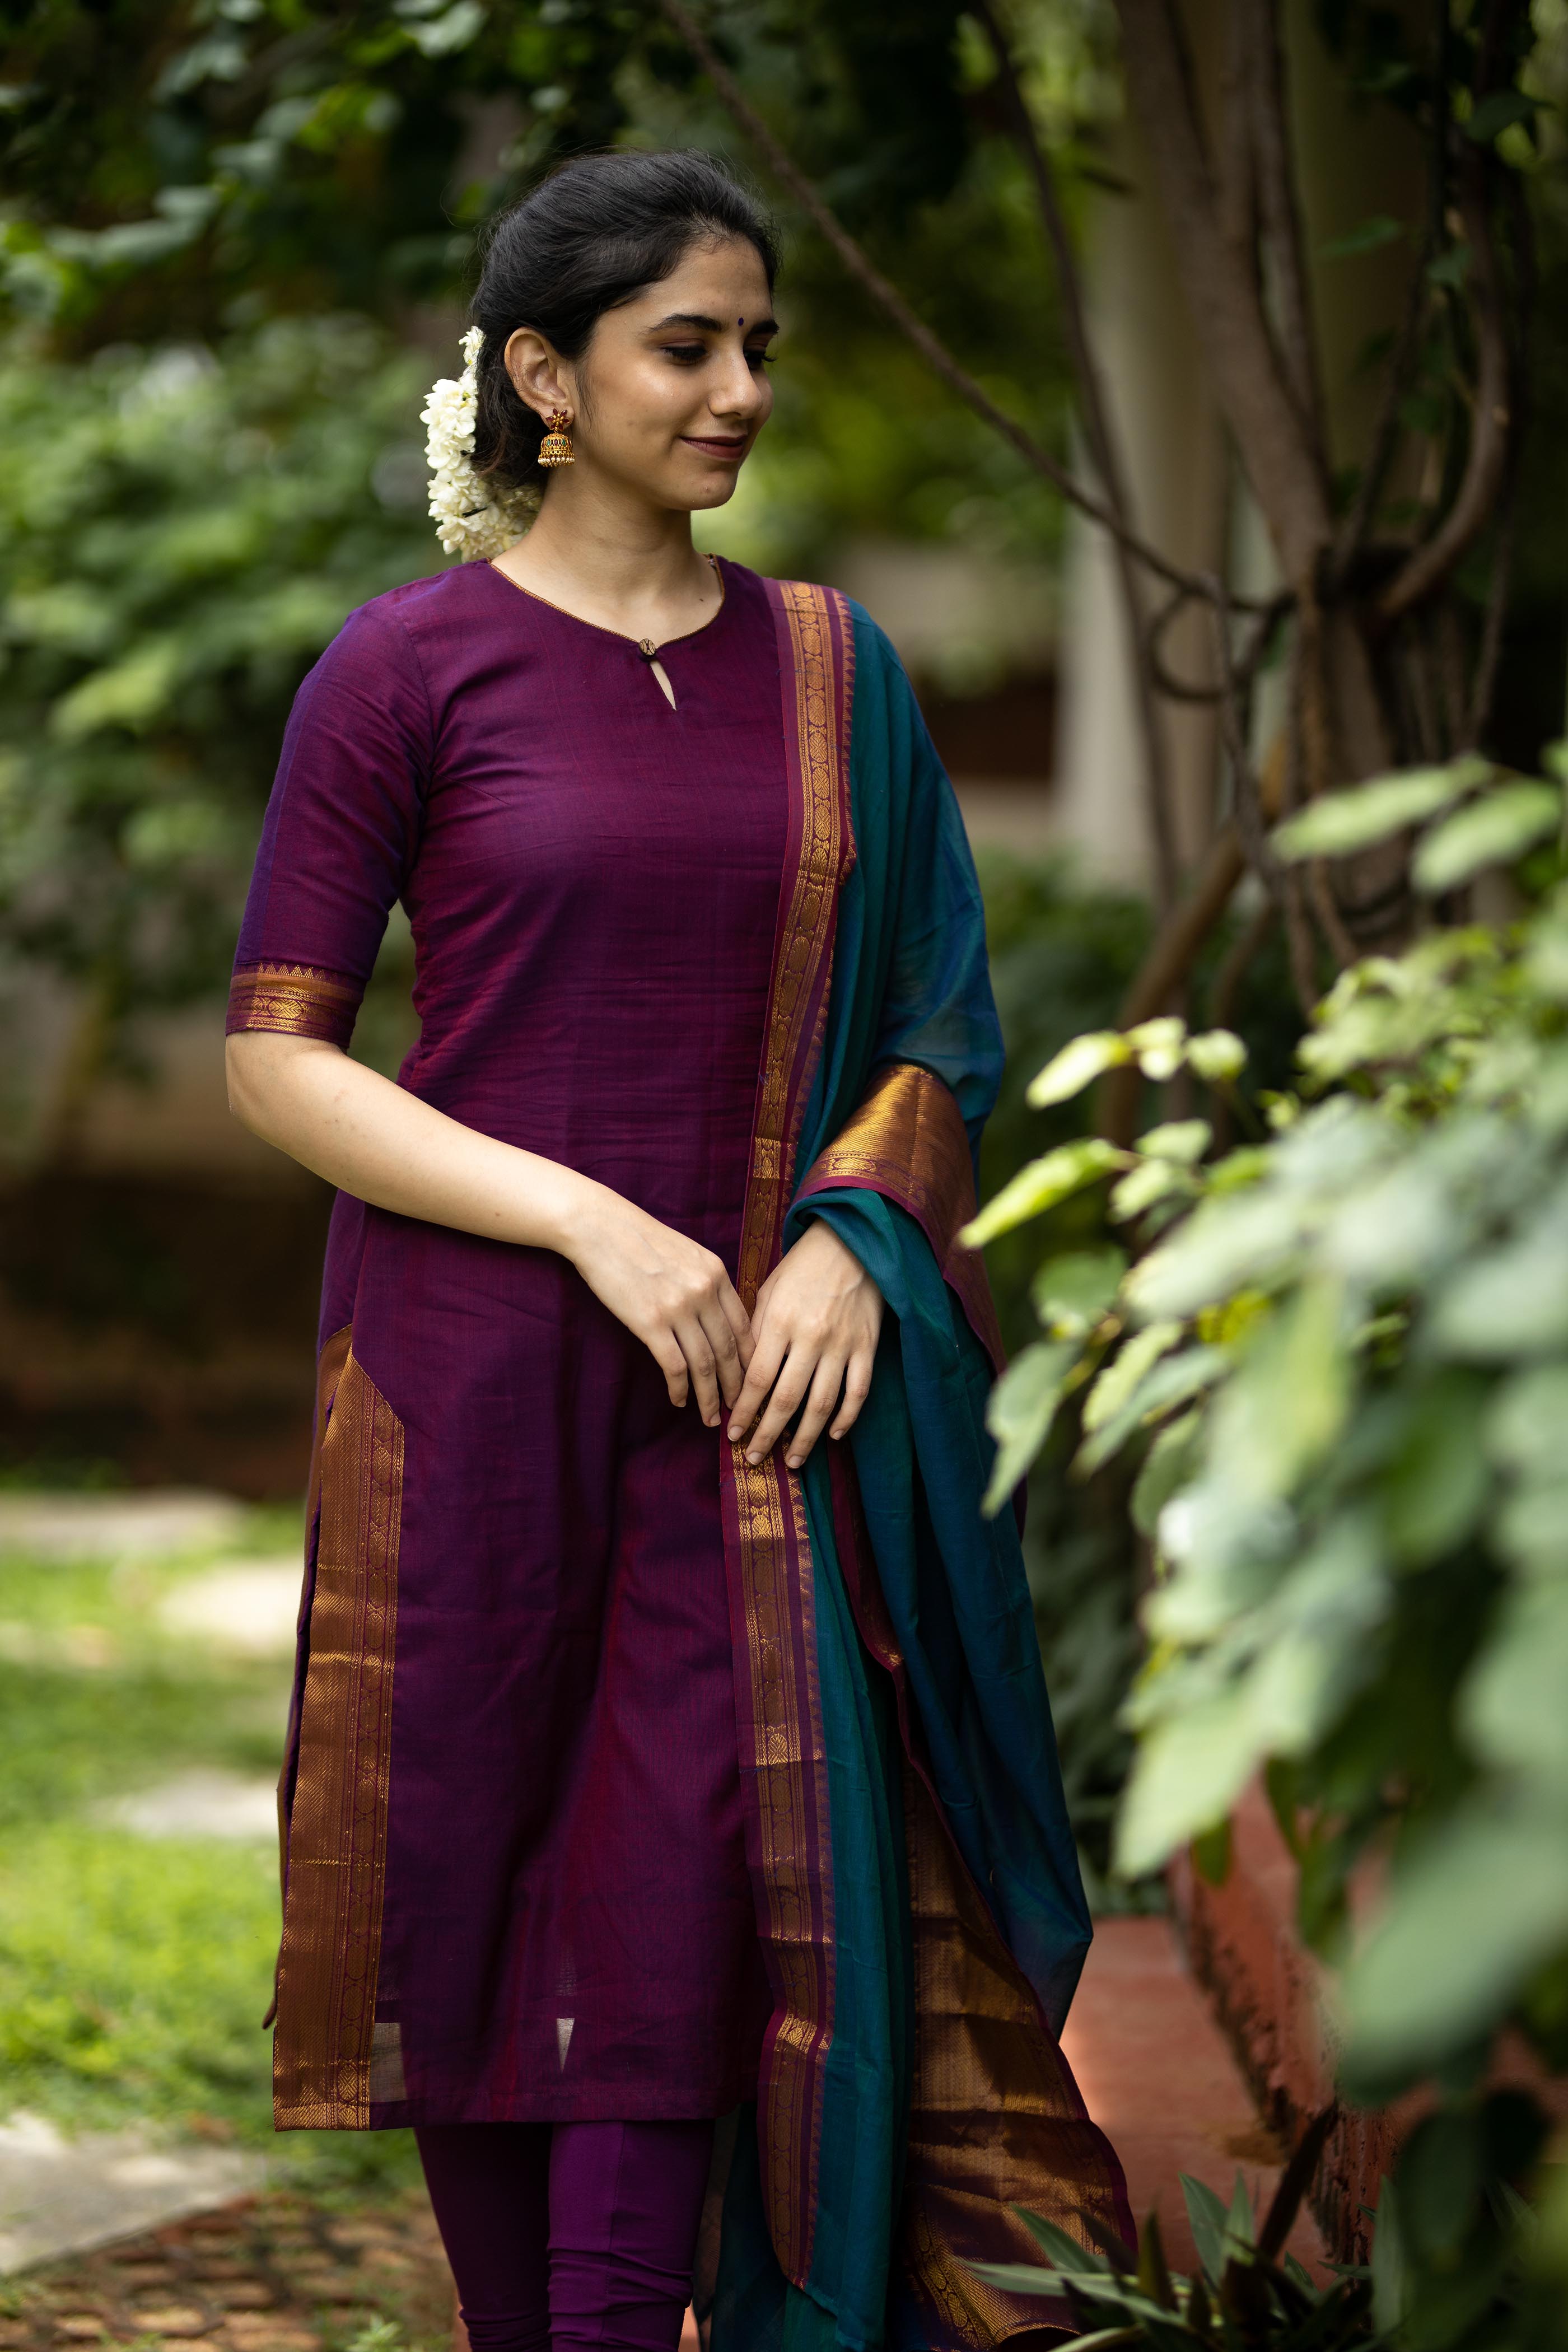 Thenmozhi Designs - Happy to restock our best seller Mangalagiri plain saree  paired with beautiful hand block printed blouse Our darling @ddneelakandan  flaunting @thenmozhidesigns Available from 6th November 10 am IST Shop